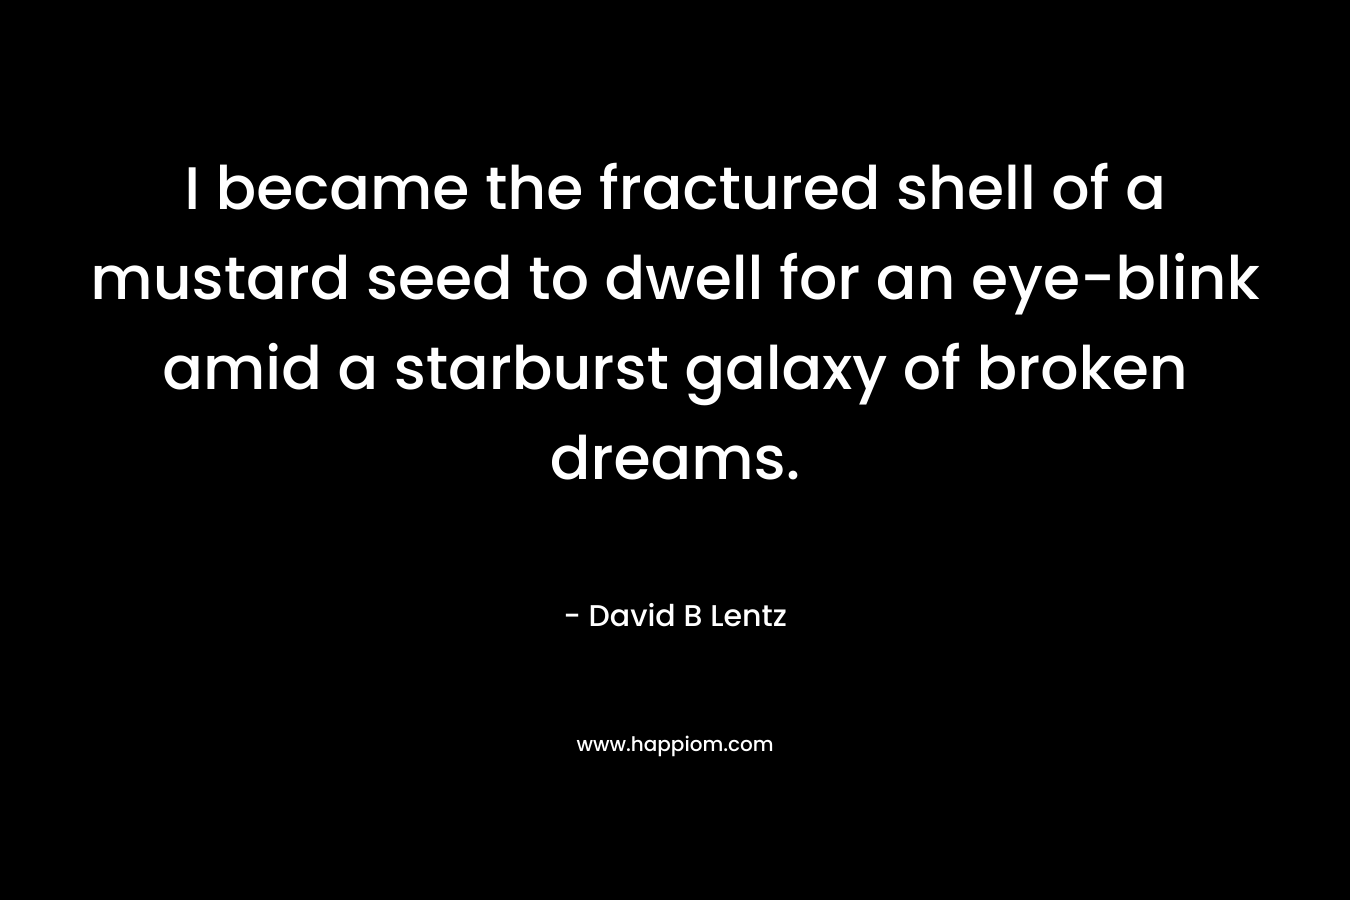 I became the fractured shell of a mustard seed to dwell for an eye-blink amid a starburst galaxy of broken dreams. – David B Lentz